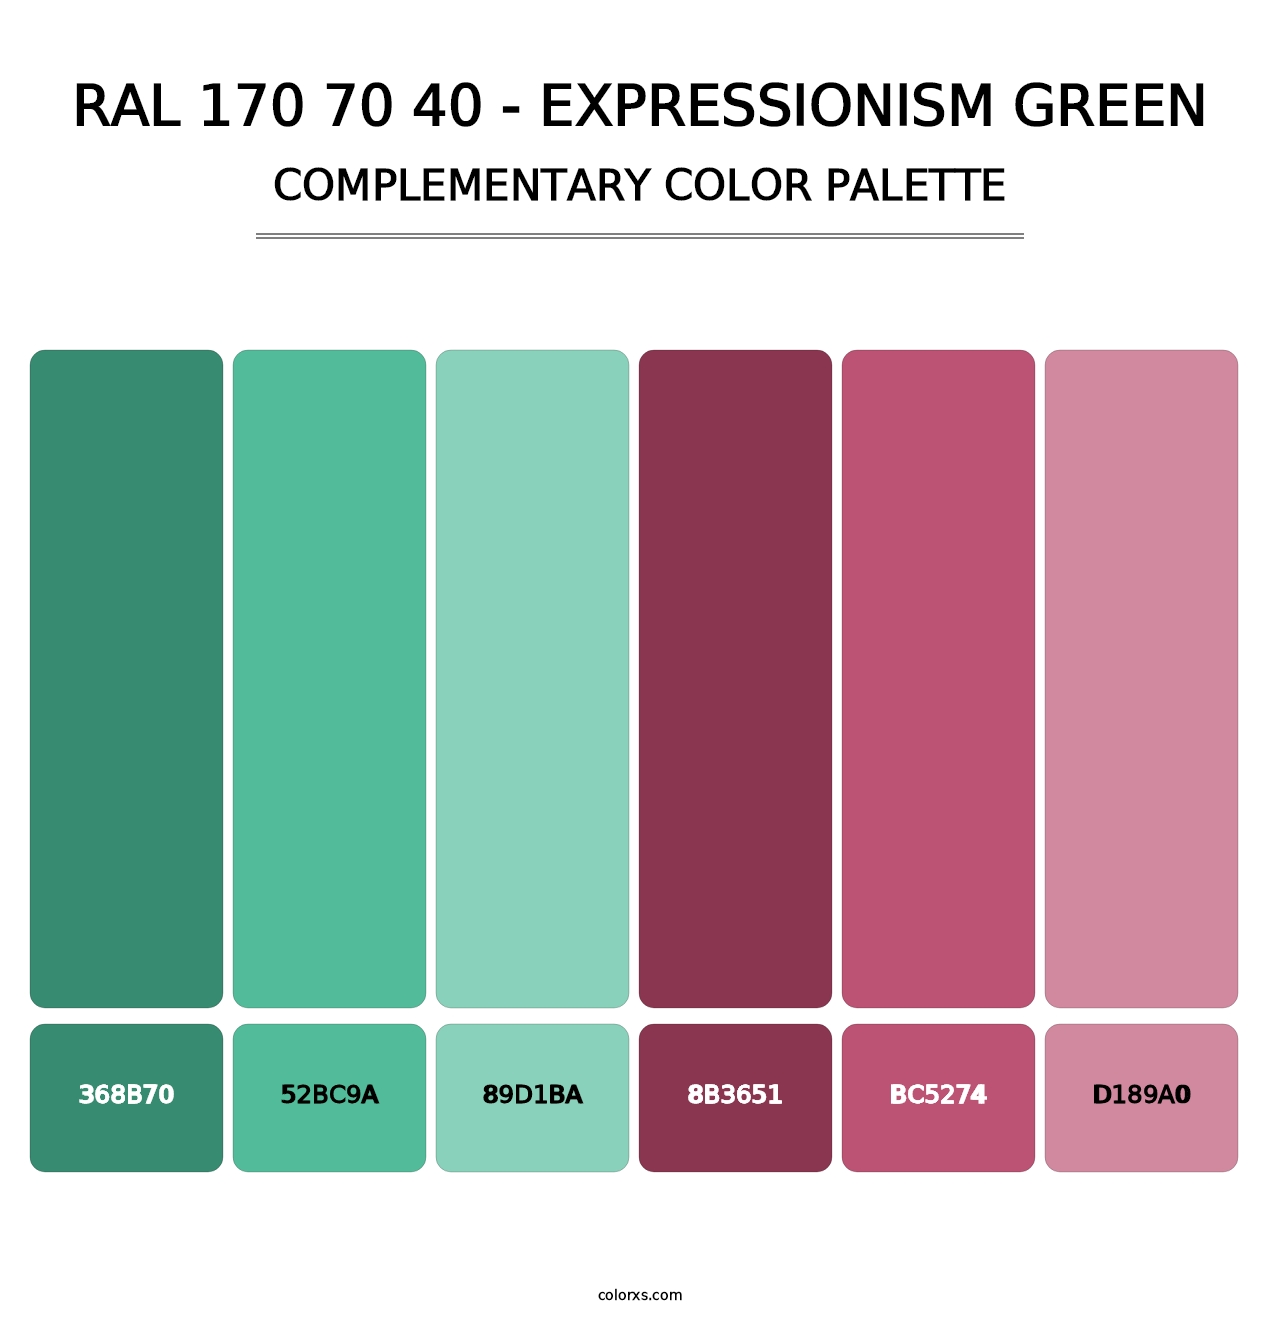 RAL 170 70 40 - Expressionism Green - Complementary Color Palette